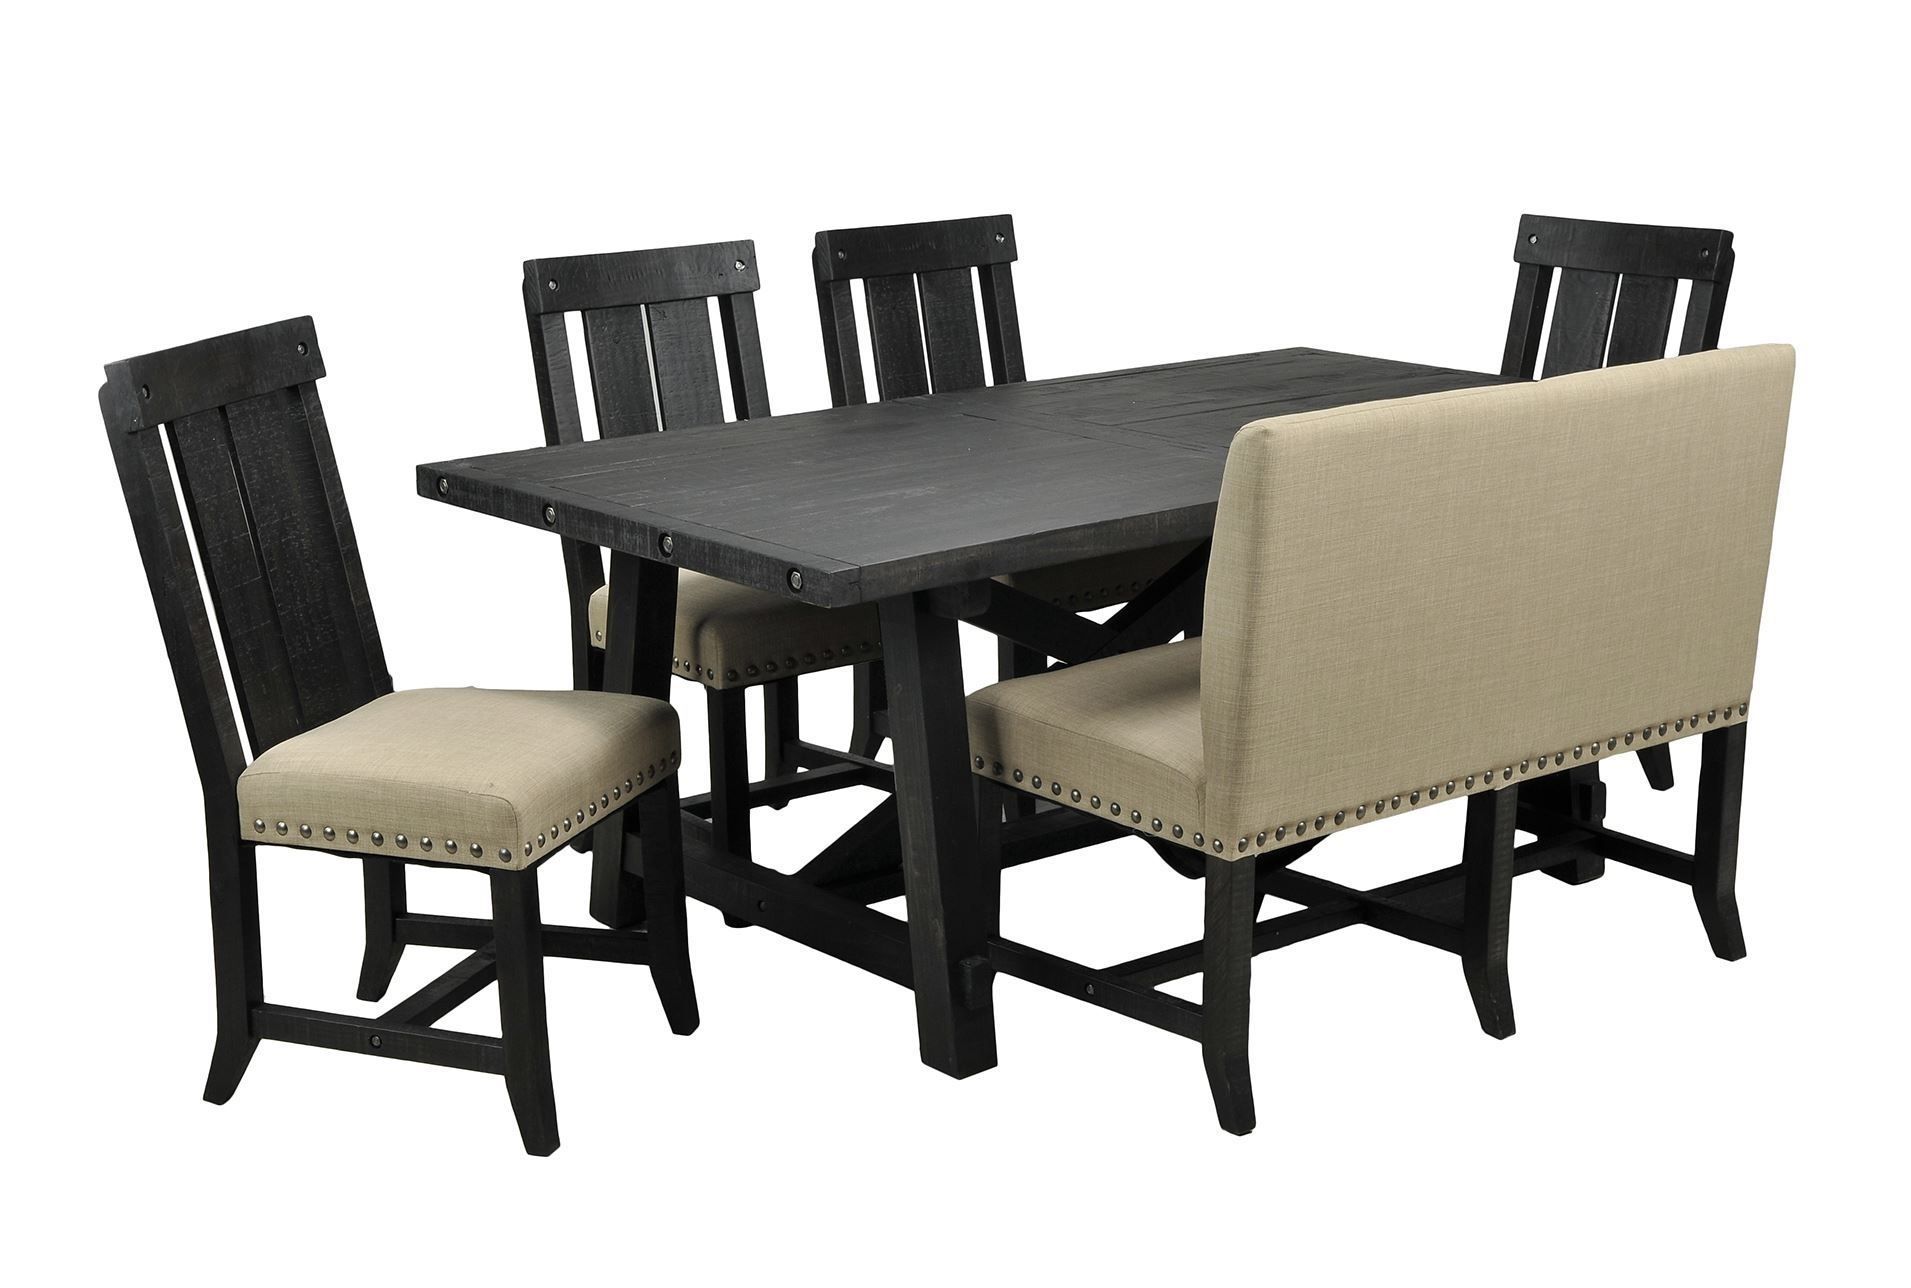 Jaxon 6 Piece Rectangle Dining Set W/bench & Wood Chairs, Café Intended For Most Recently Released Jaxon Grey 6 Piece Rectangle Extension Dining Sets With Bench & Uph Chairs (View 8 of 20)